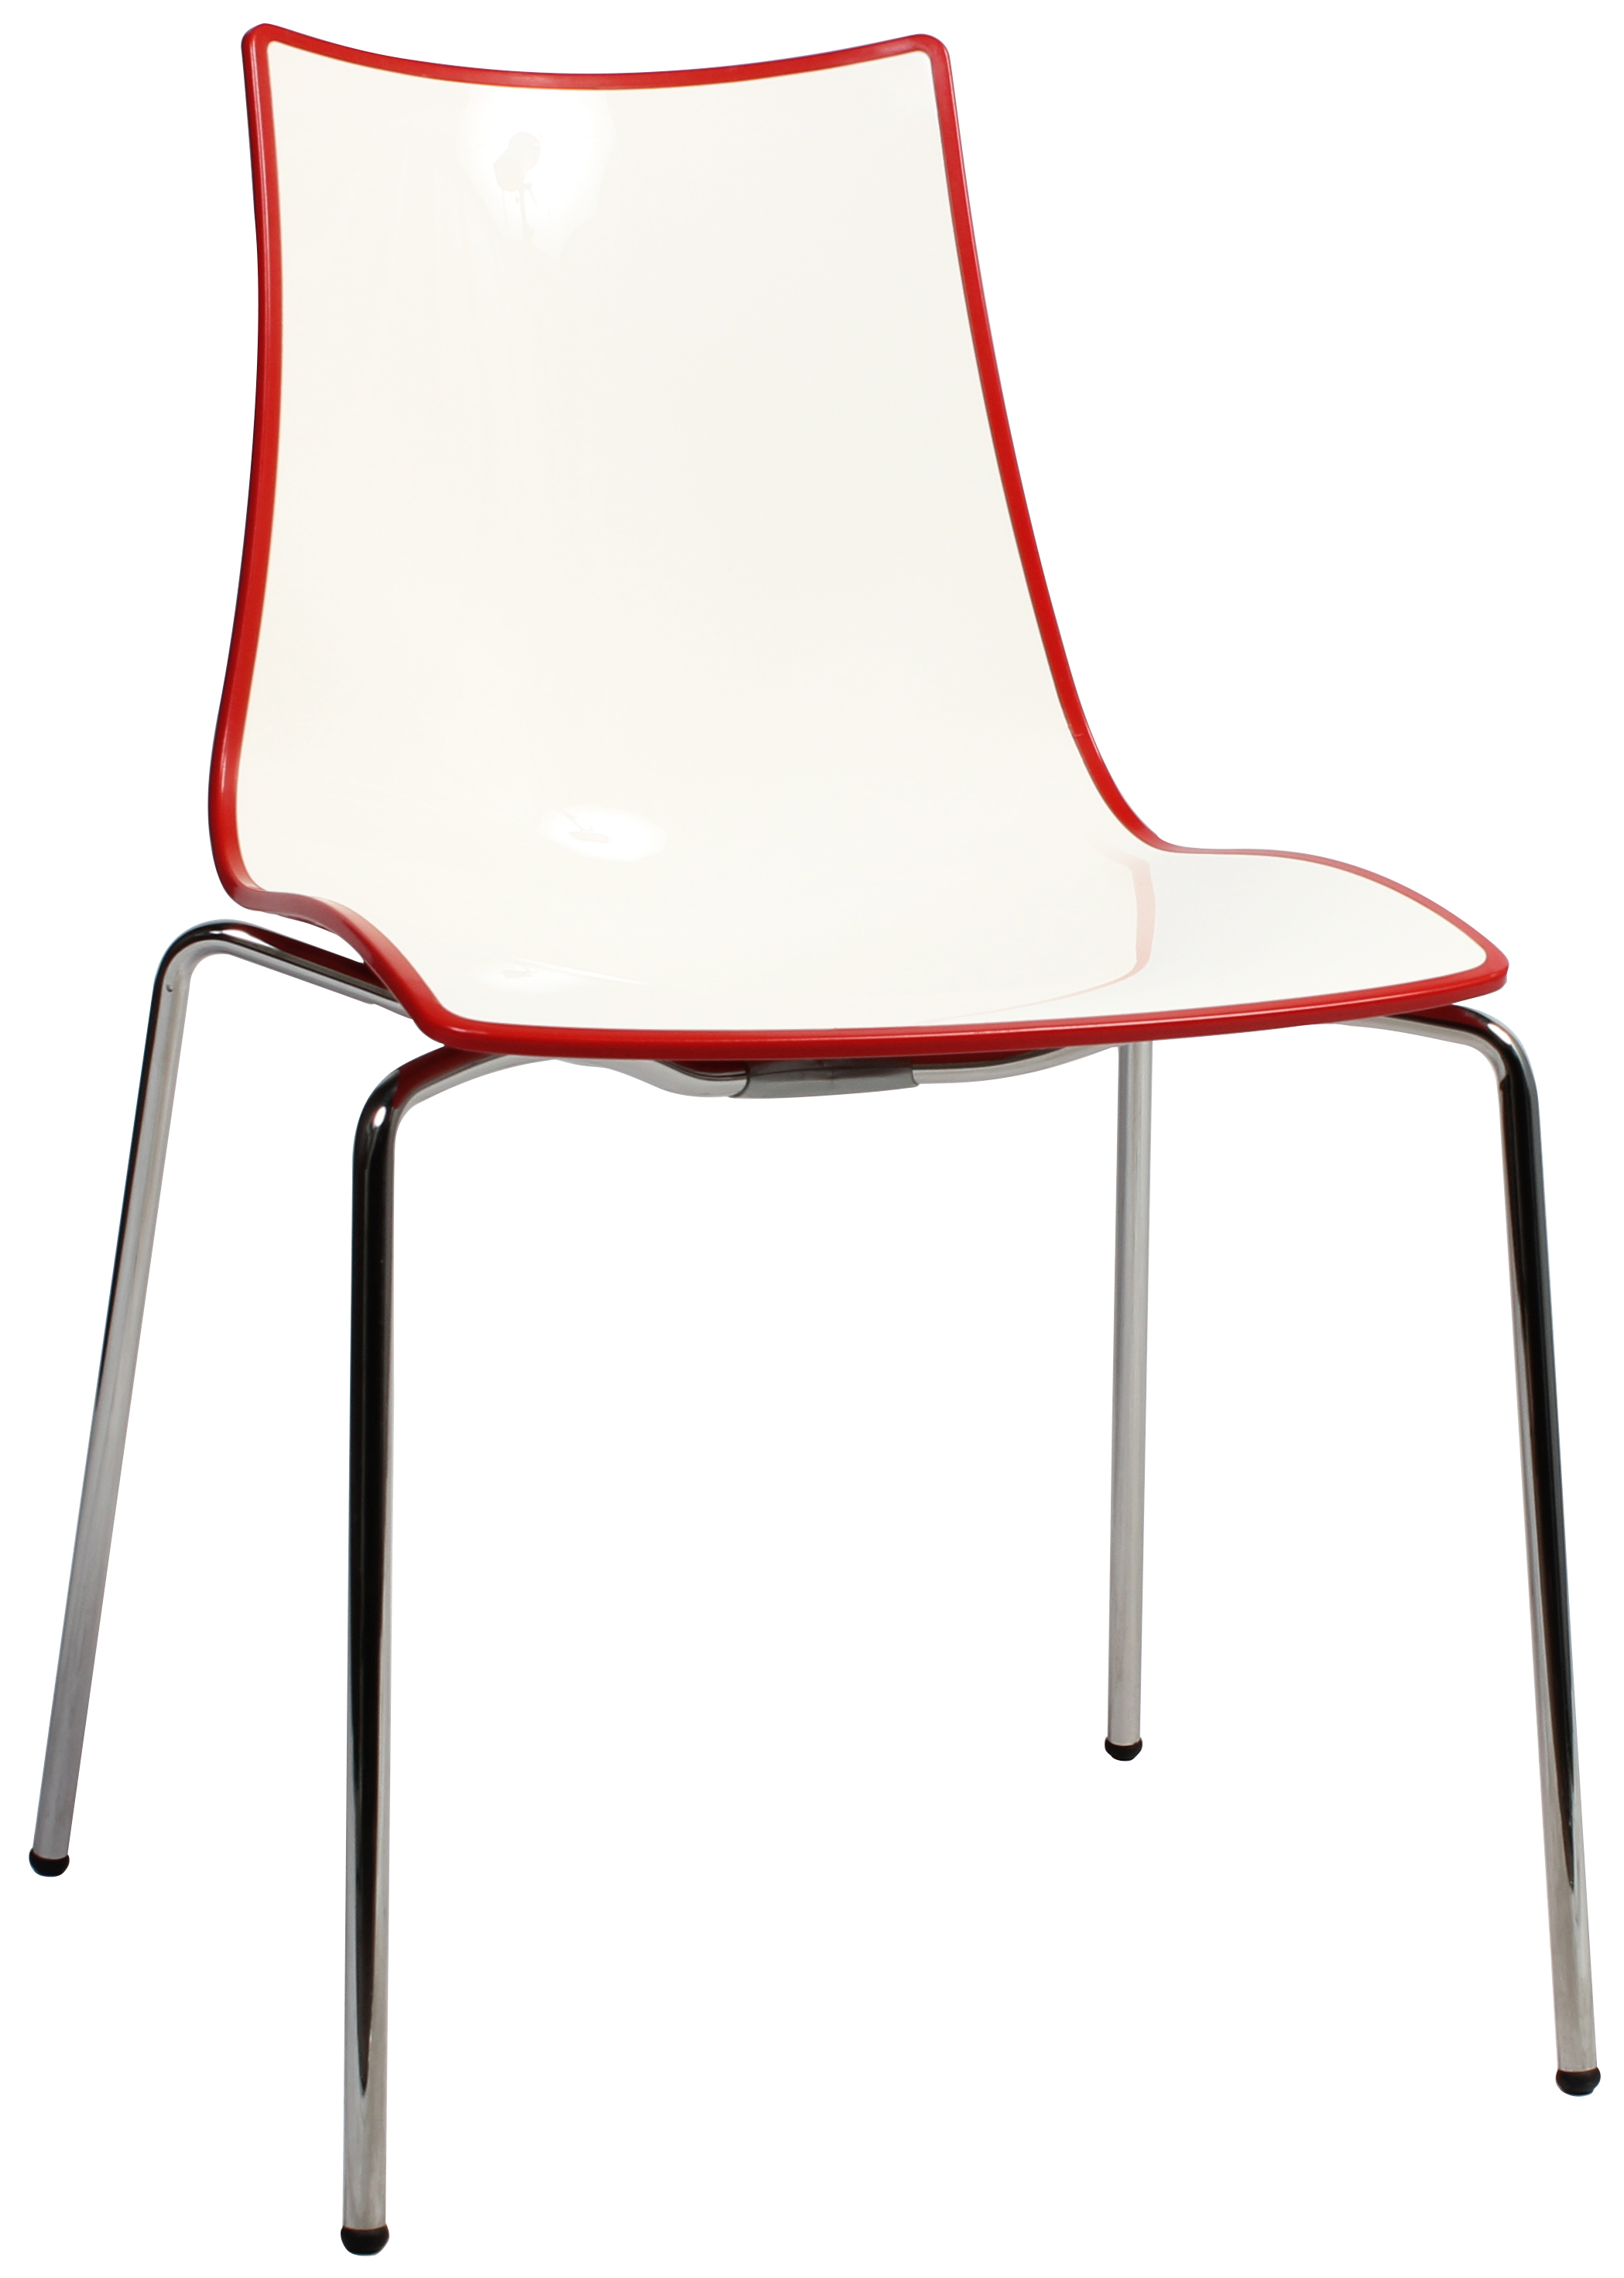 CHAIR BICOLORE METAL CHROME-RED